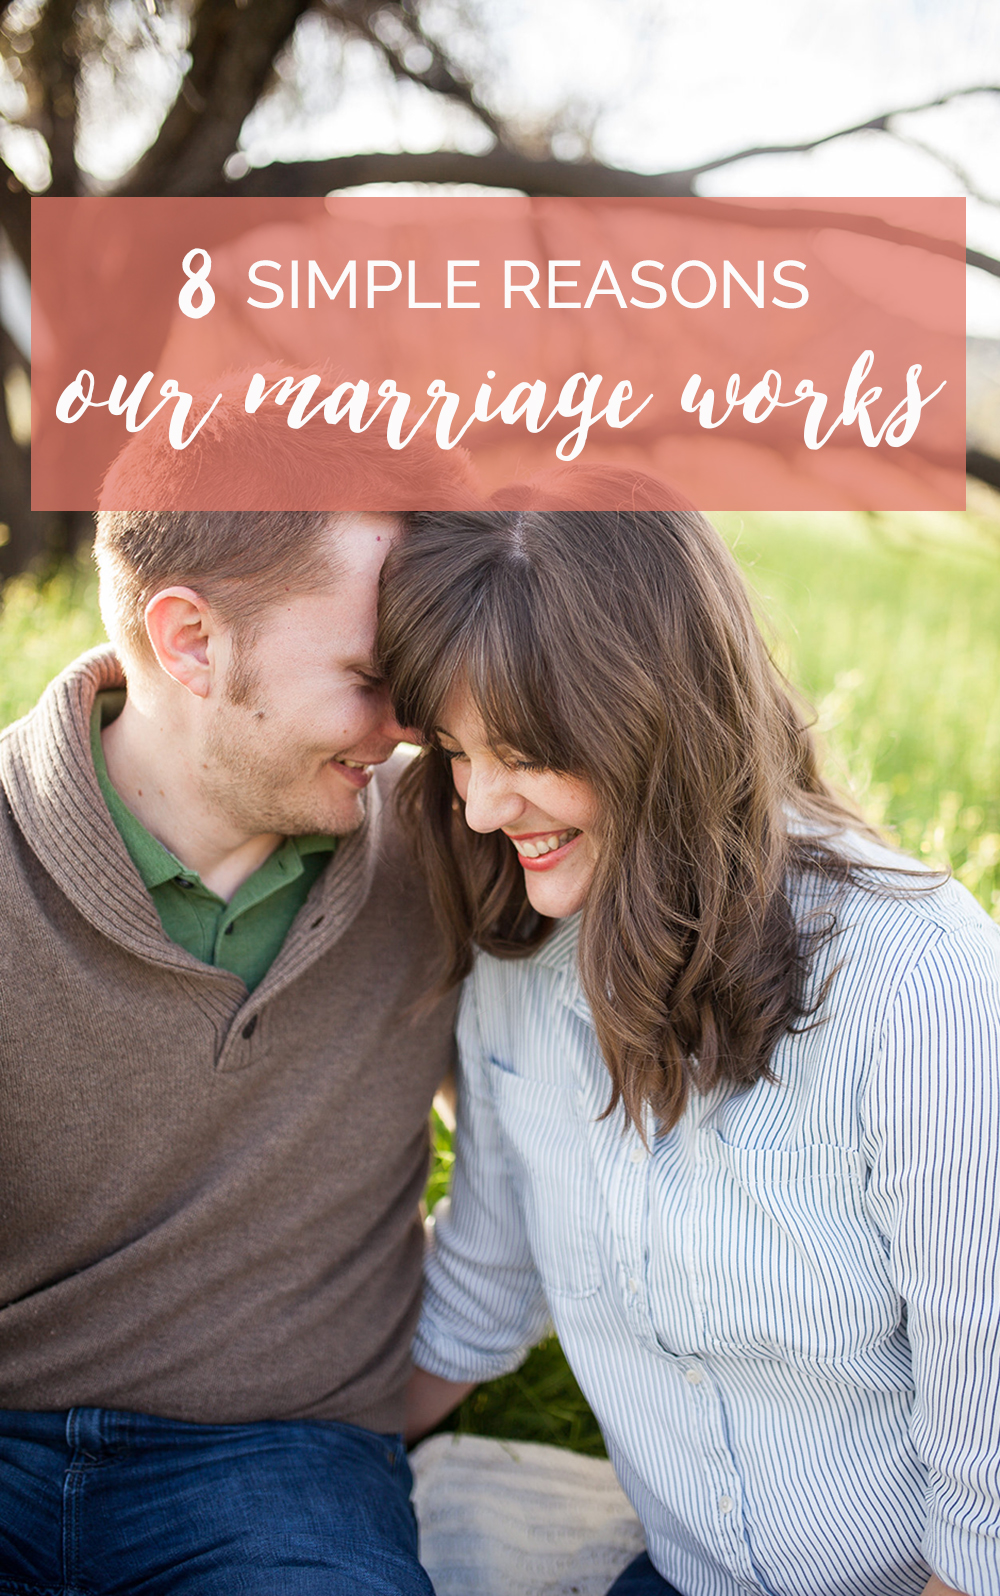 8 Simple Reasons Our Marriage Works